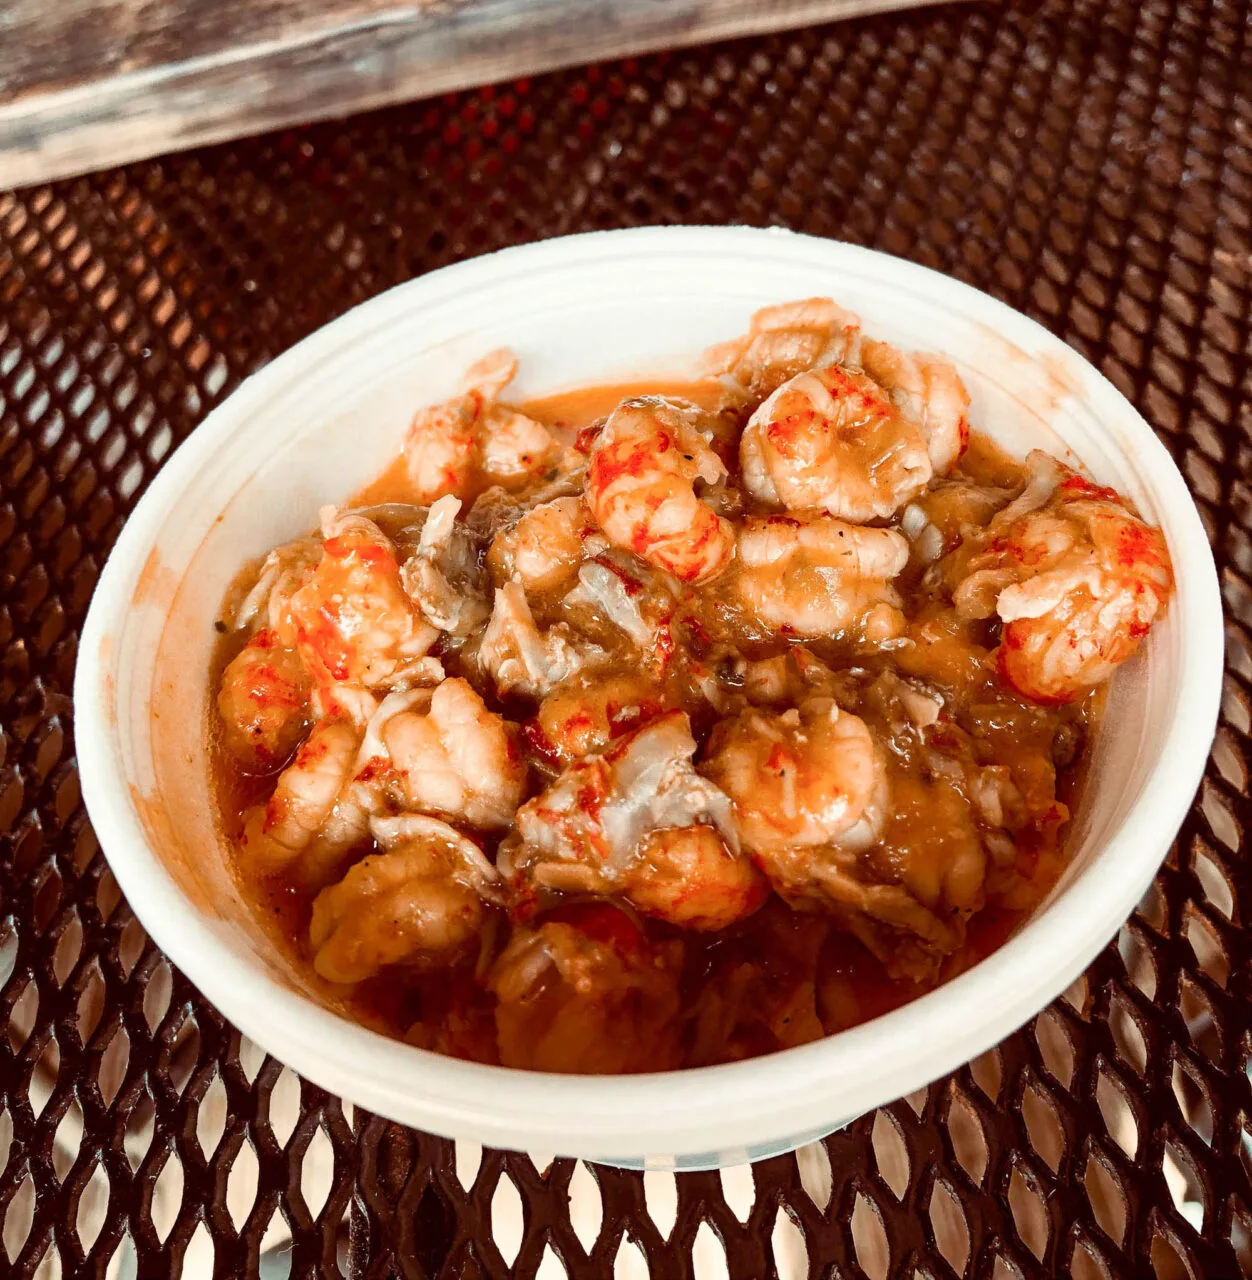 Crawfish Étouffée is a must-try Cajun and Creole dish from Louisiana.